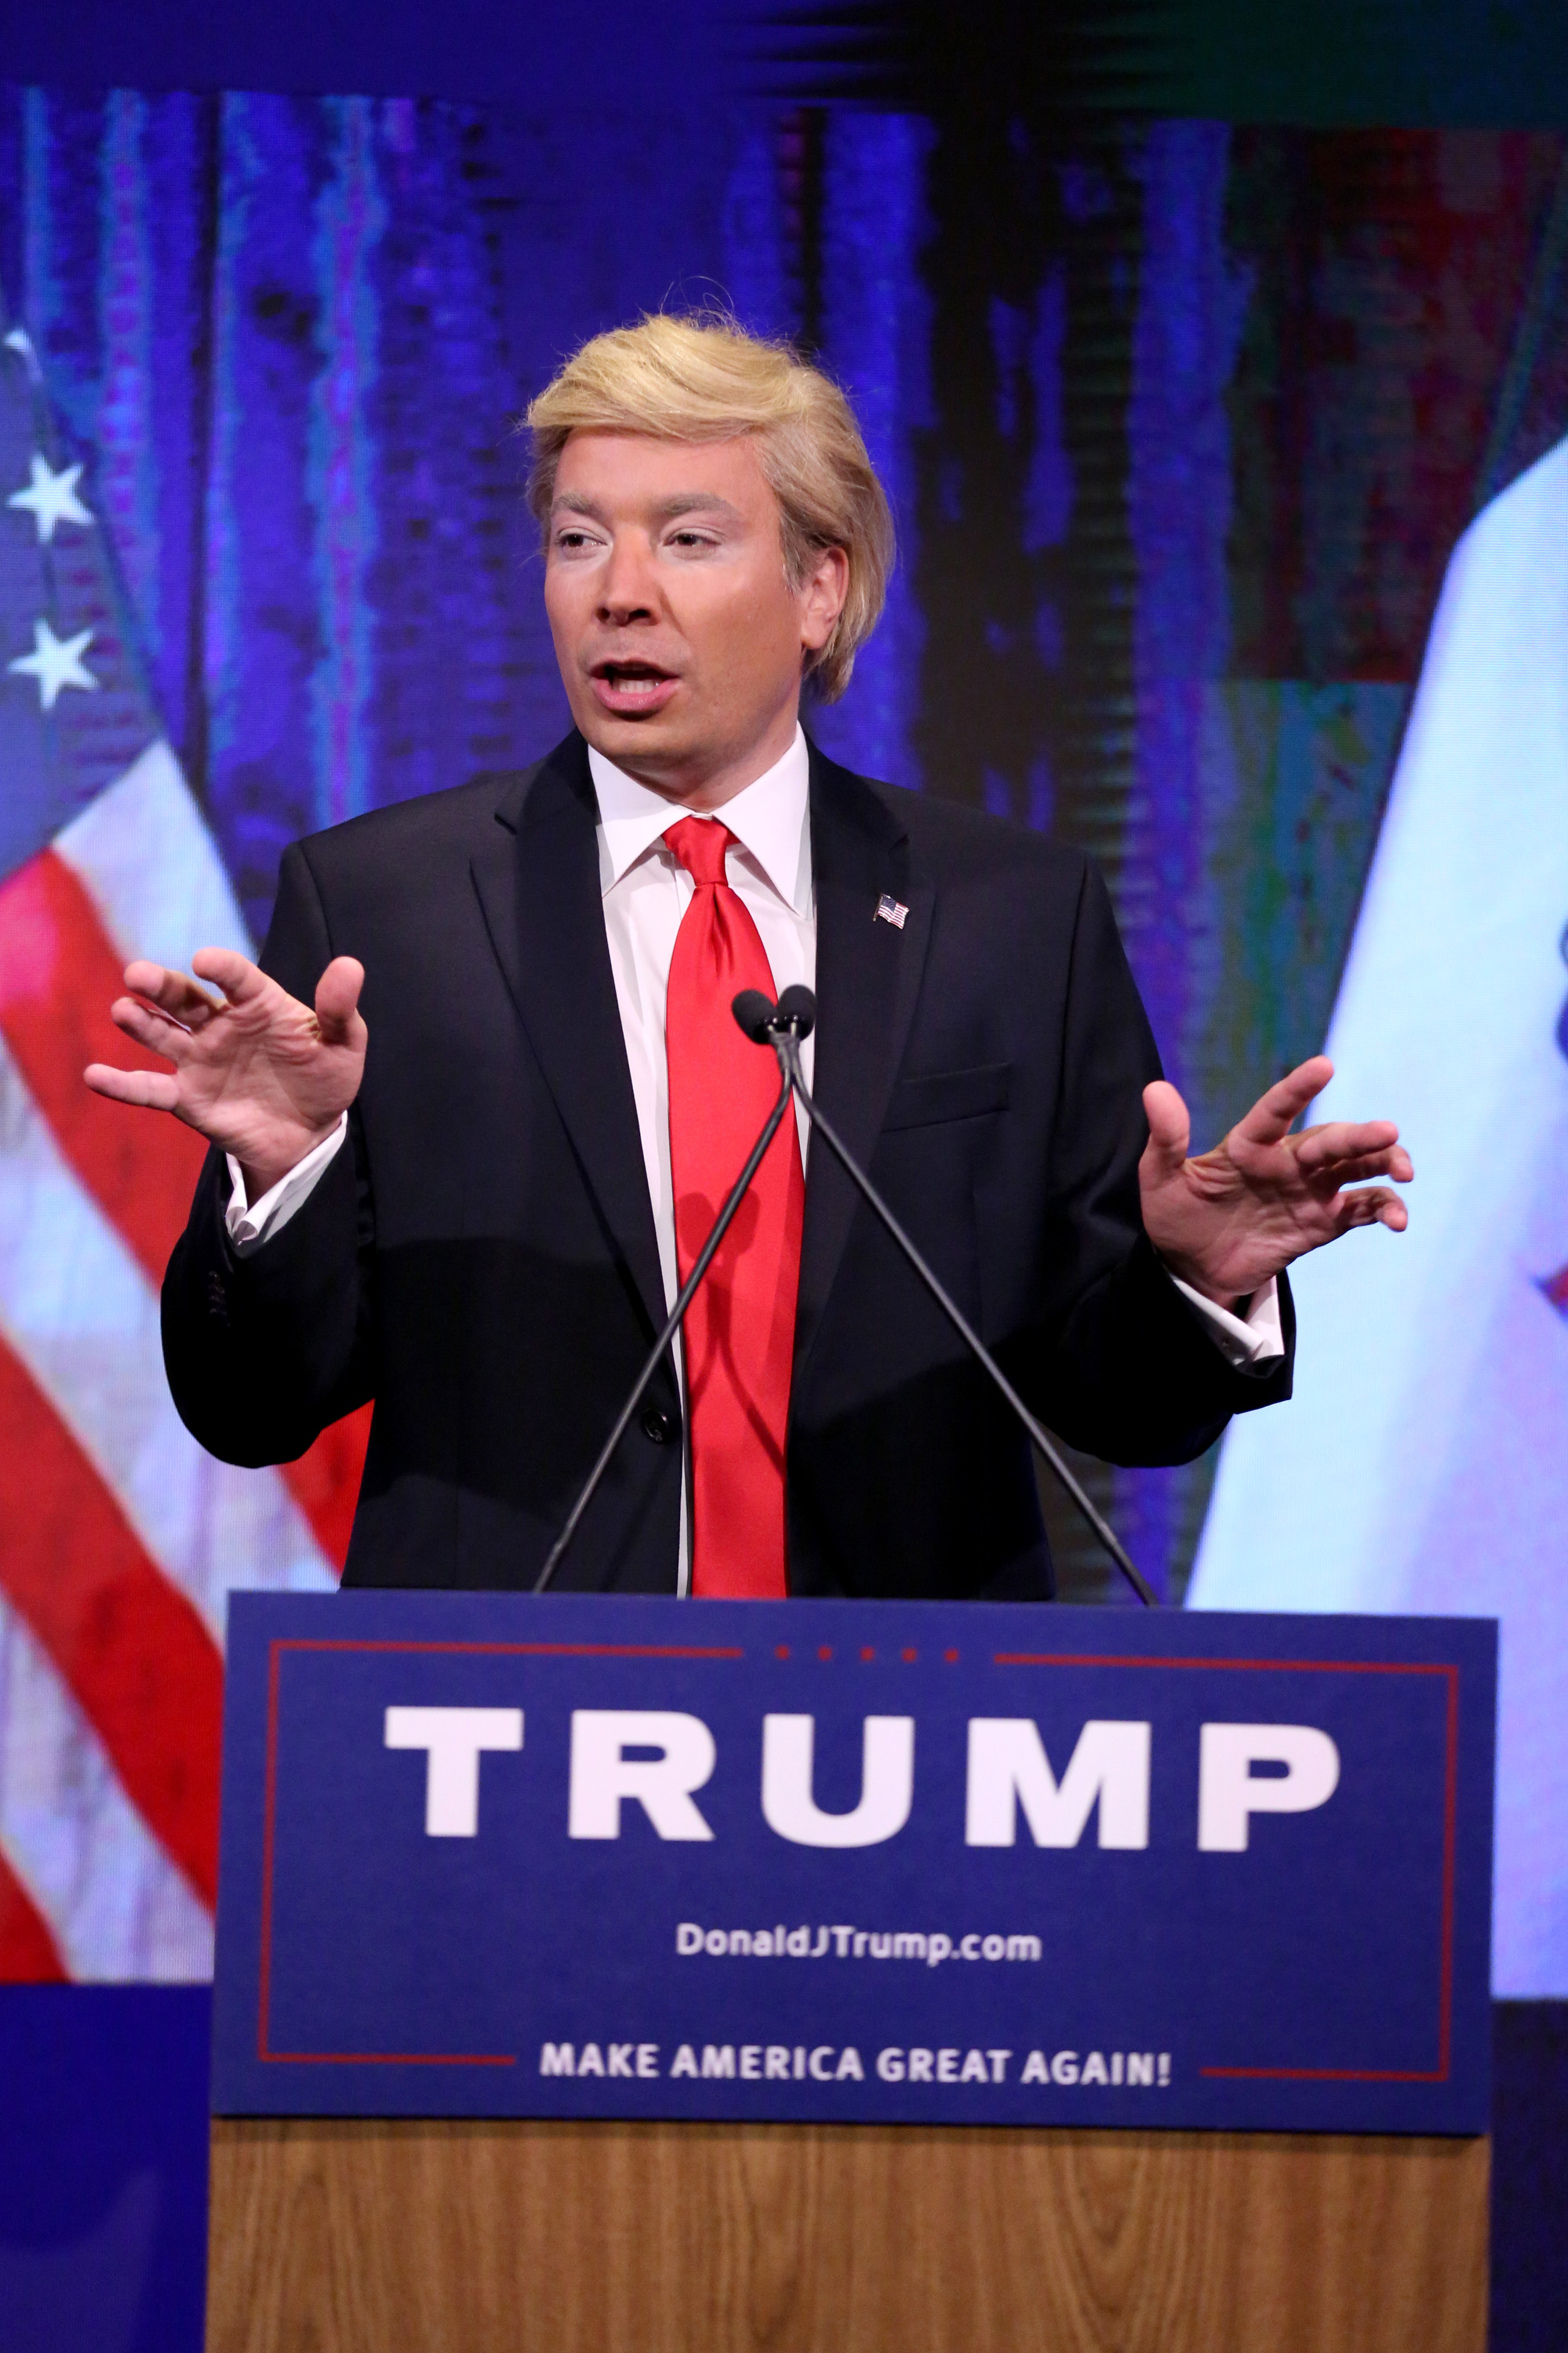 Pictured: Host Jimmy Fallon as Donald Trump on February 3, 2016.